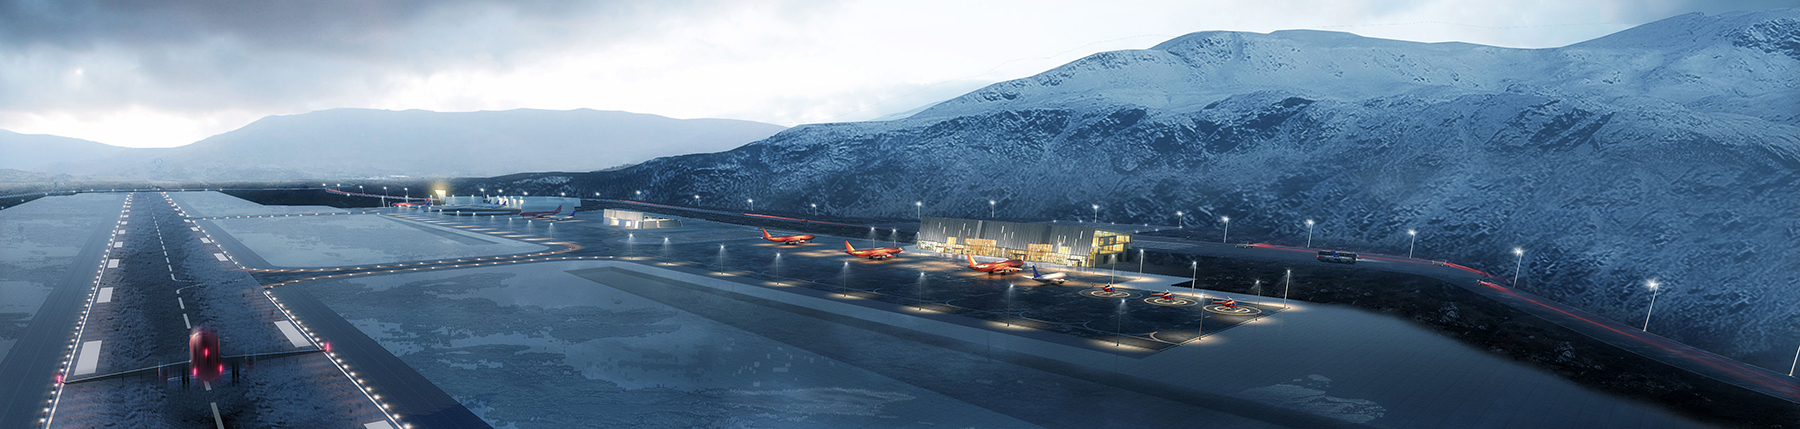 Nuuk’s international airport will feature a 2,200 m long runway, a taxiway, a new control tower, a terminal area with an apron and building plots for terminal and service buildings, and parking in the terminal area. (Rendering courtesy of ZESO Architects)